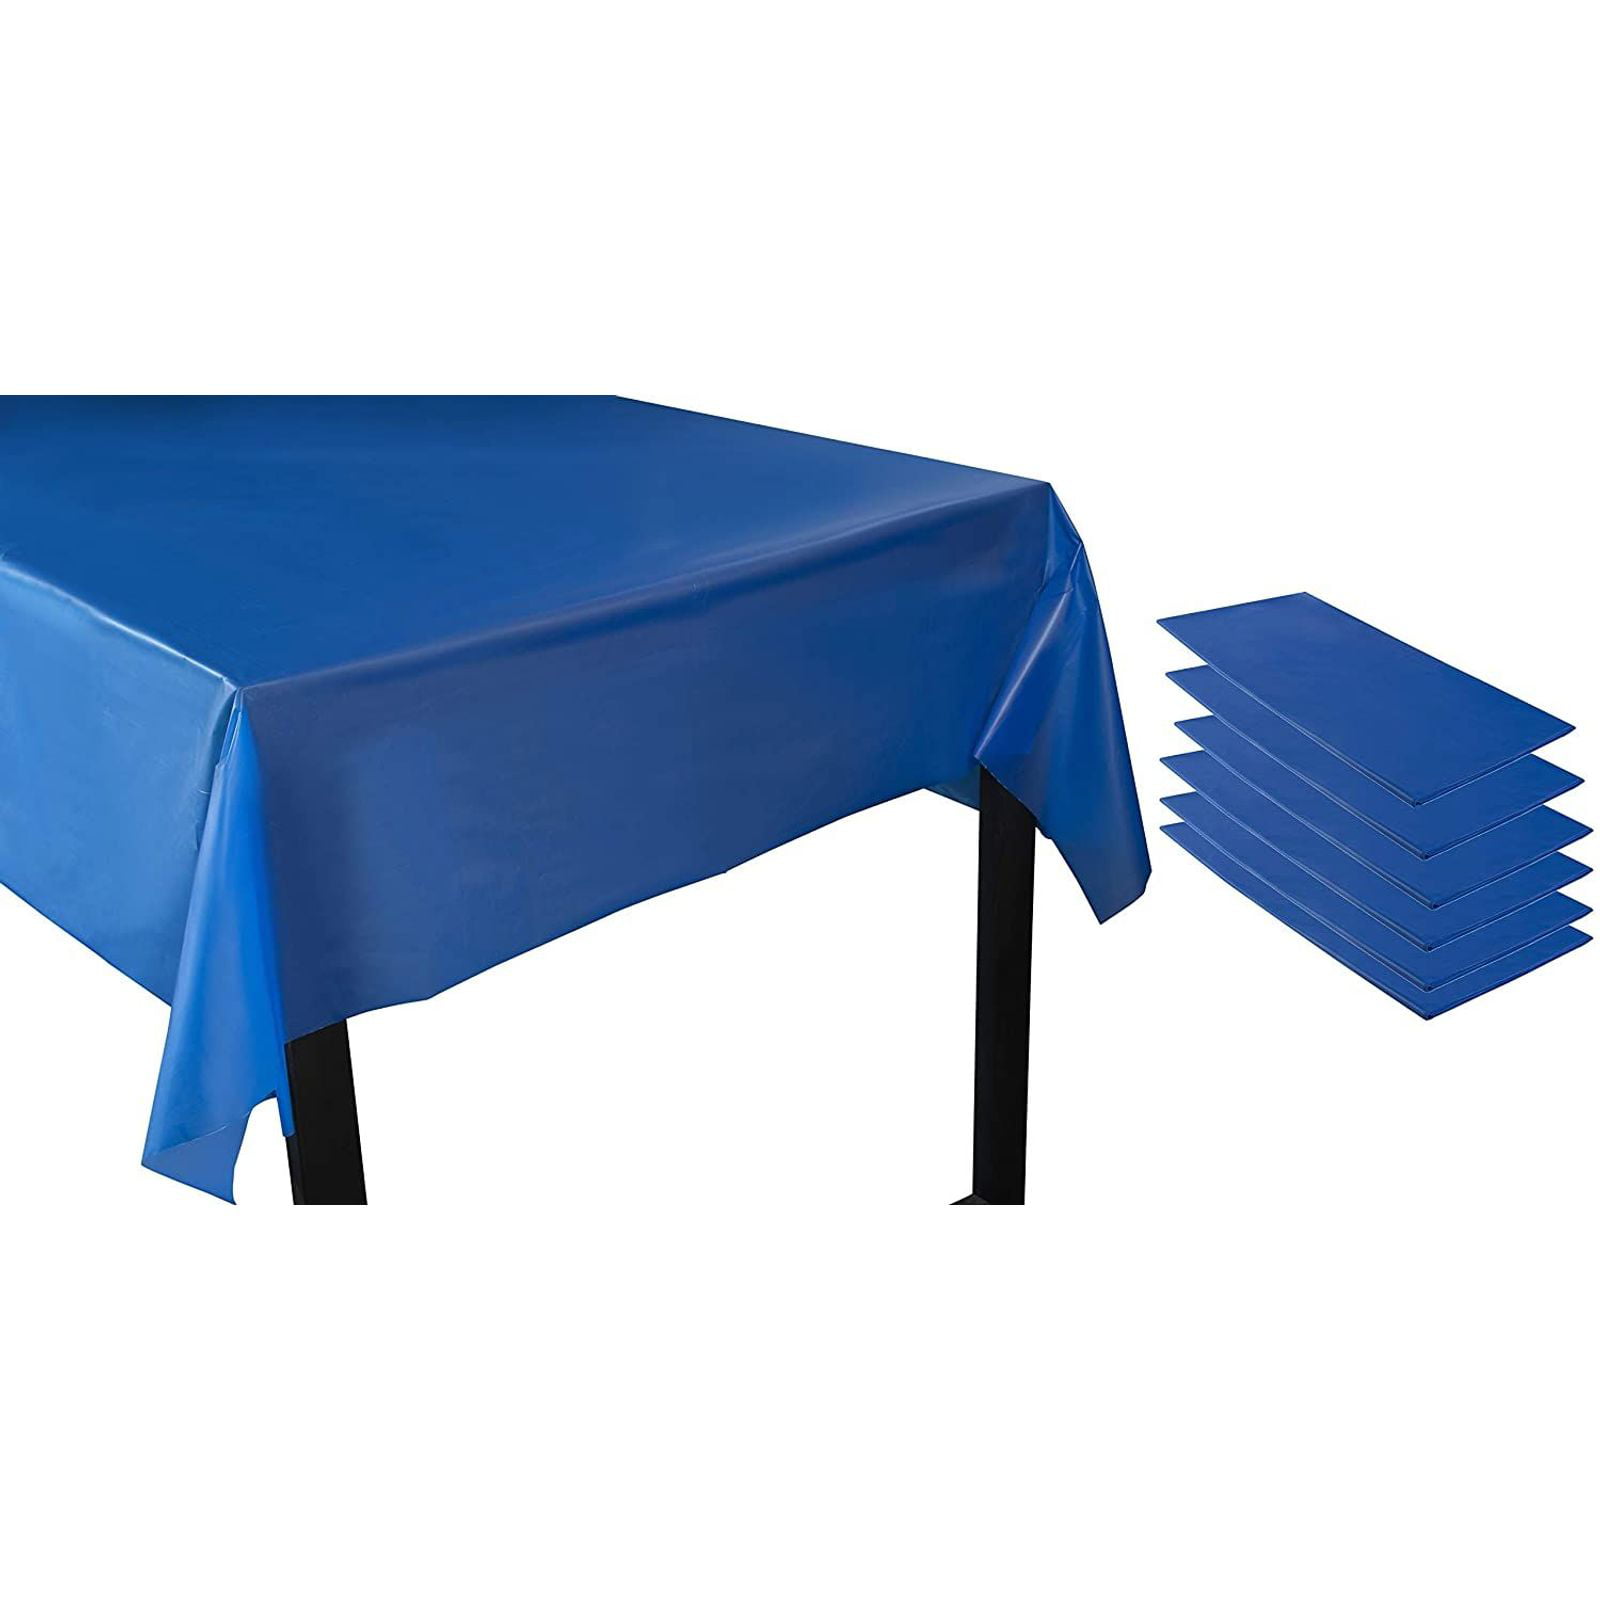 2 Pieces Tablecloths Rectangular Plastic Table Cover 54 x 108 Waterproof Table Cloths Solid Colour Tablecloth for Wedding Supplies Graduation Baby Shower Birthday Party Decoration Dark blue 